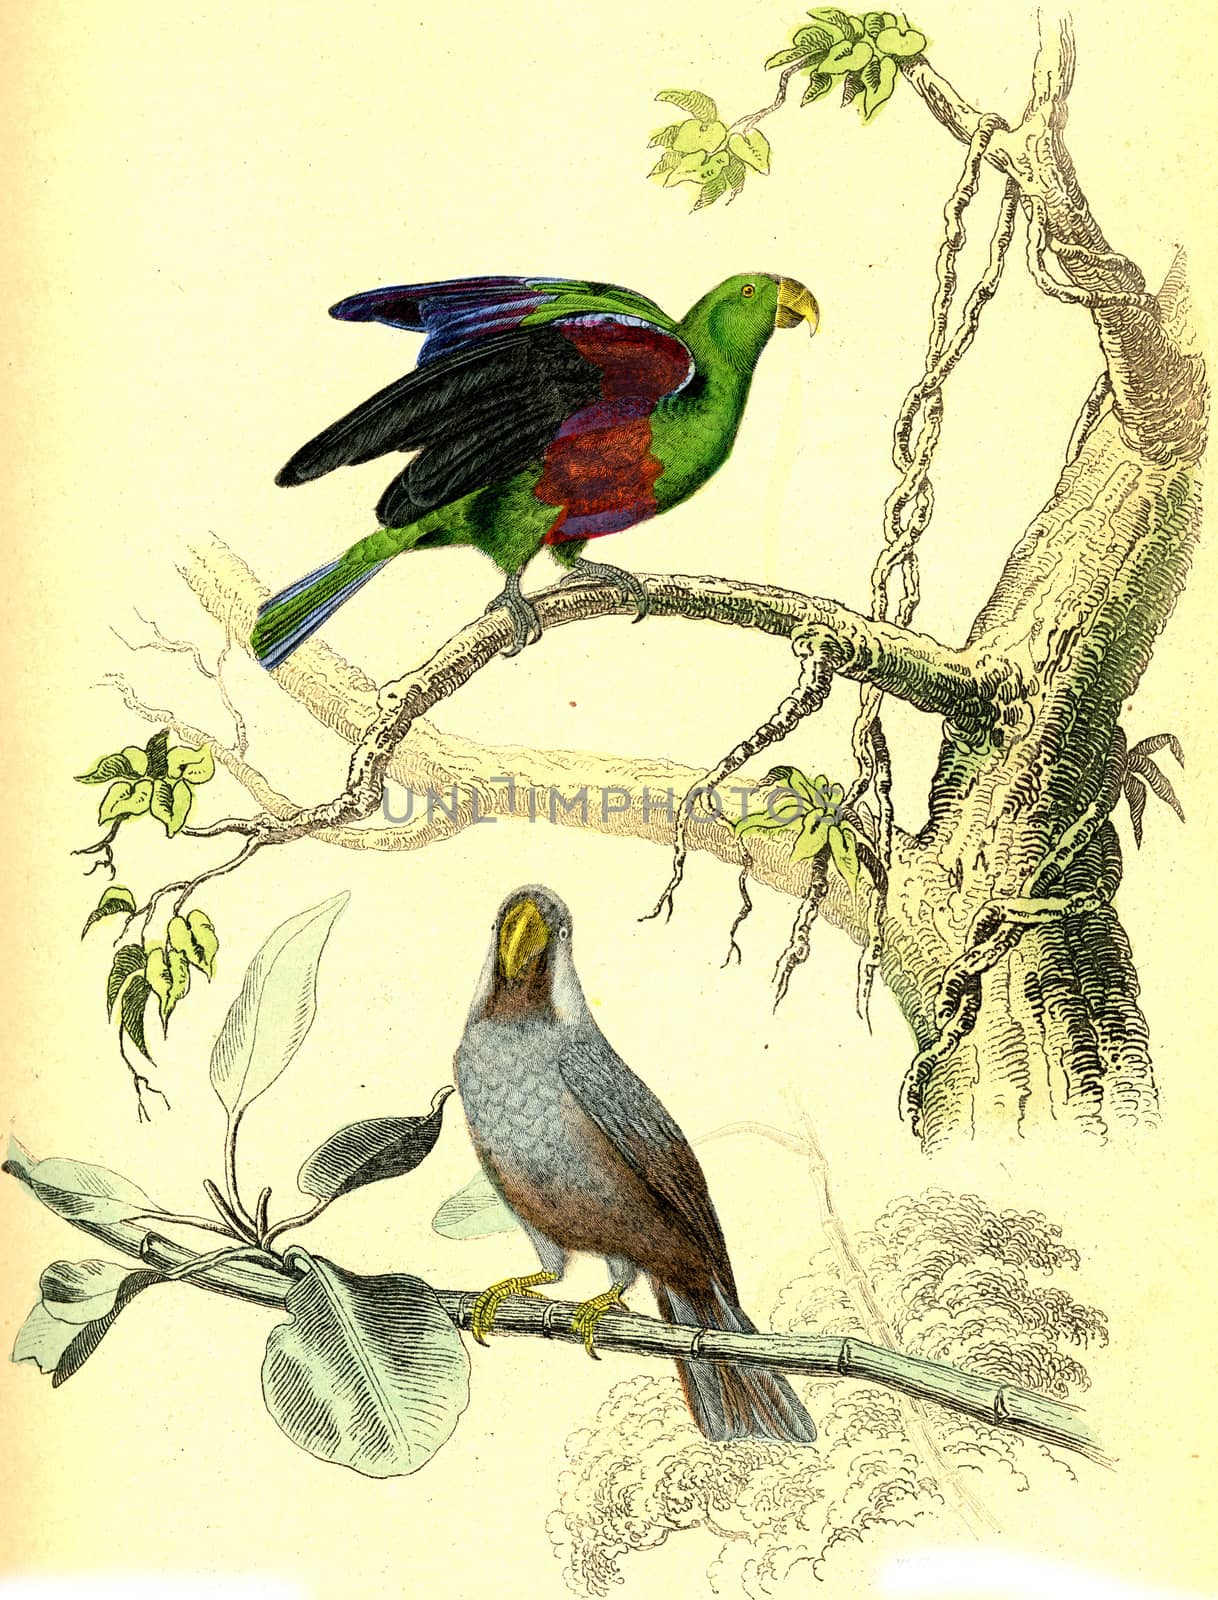 The Green Parrot, The Mascarin, vintage engraving. by Morphart